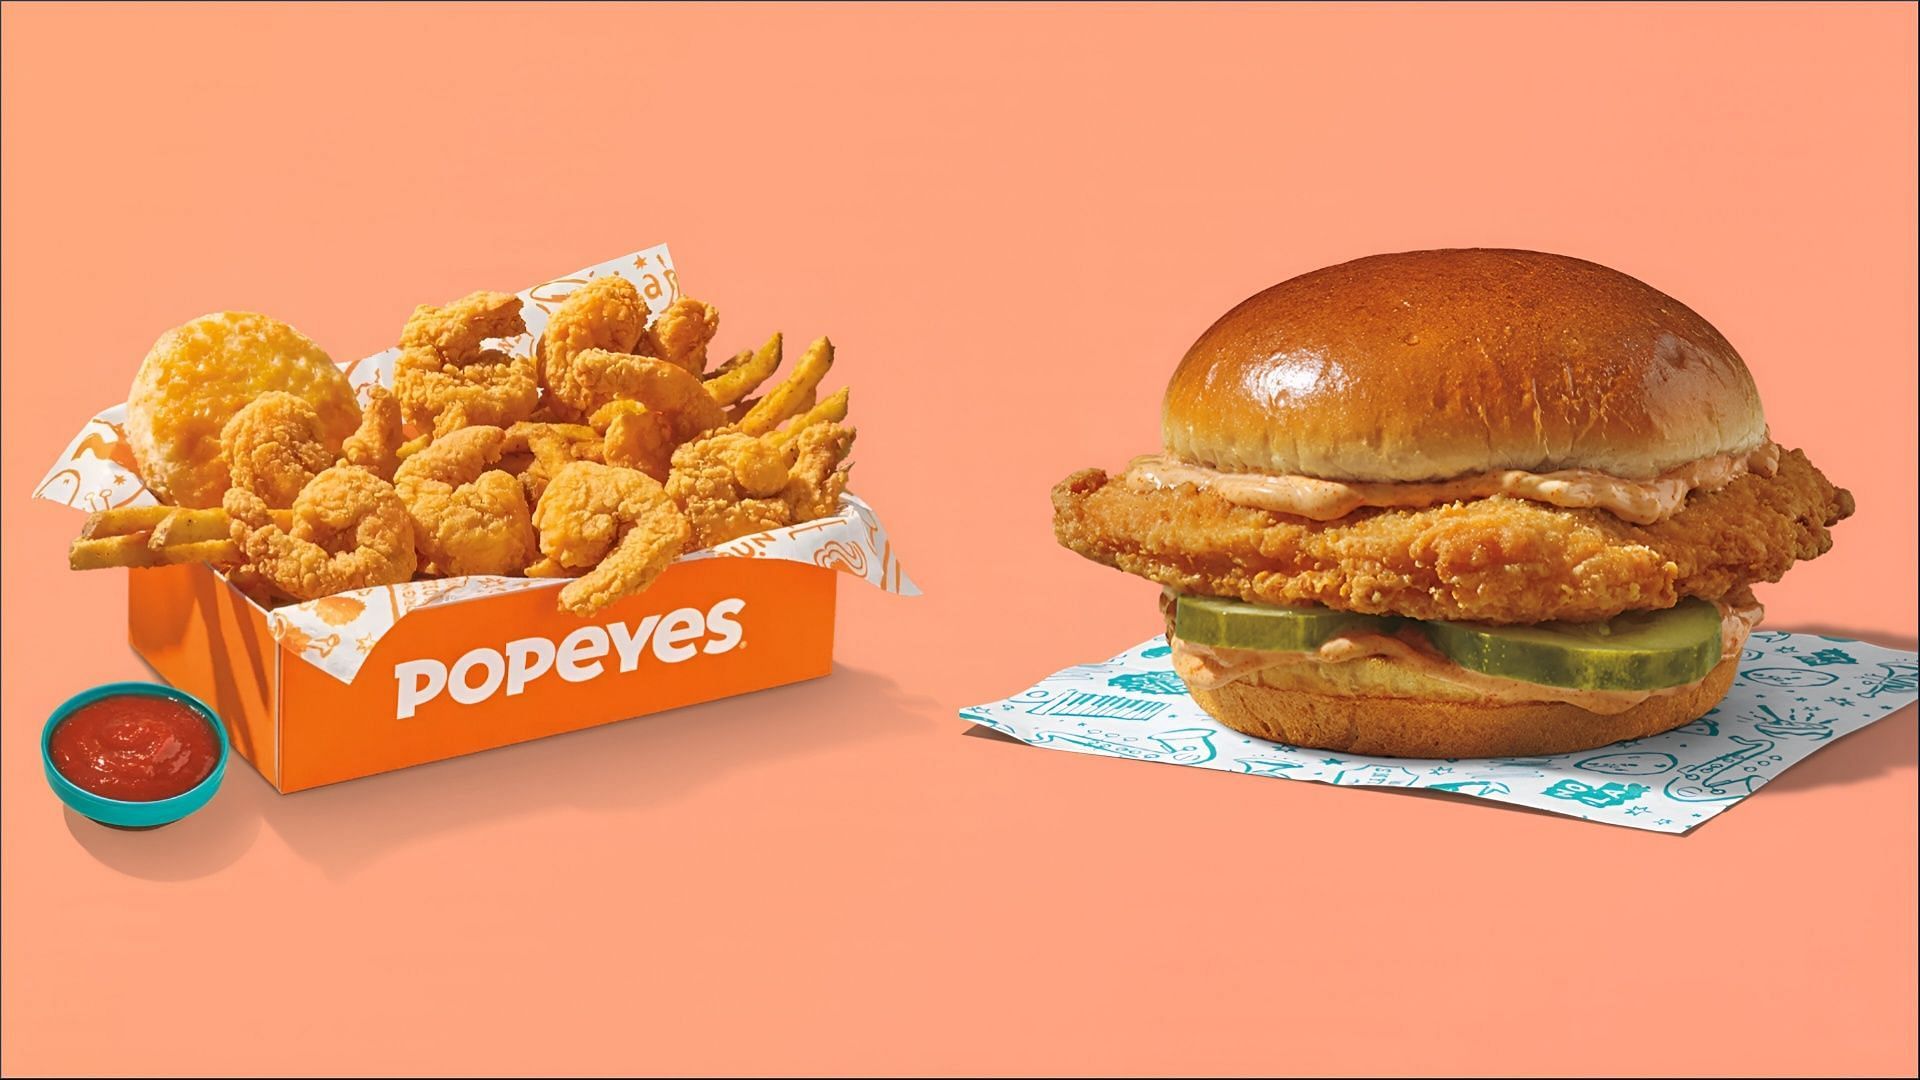 Popeyes brings back Flounder Fish Sandwich and Shrimp Tackle Box for a limited time (Image via Popeyes)